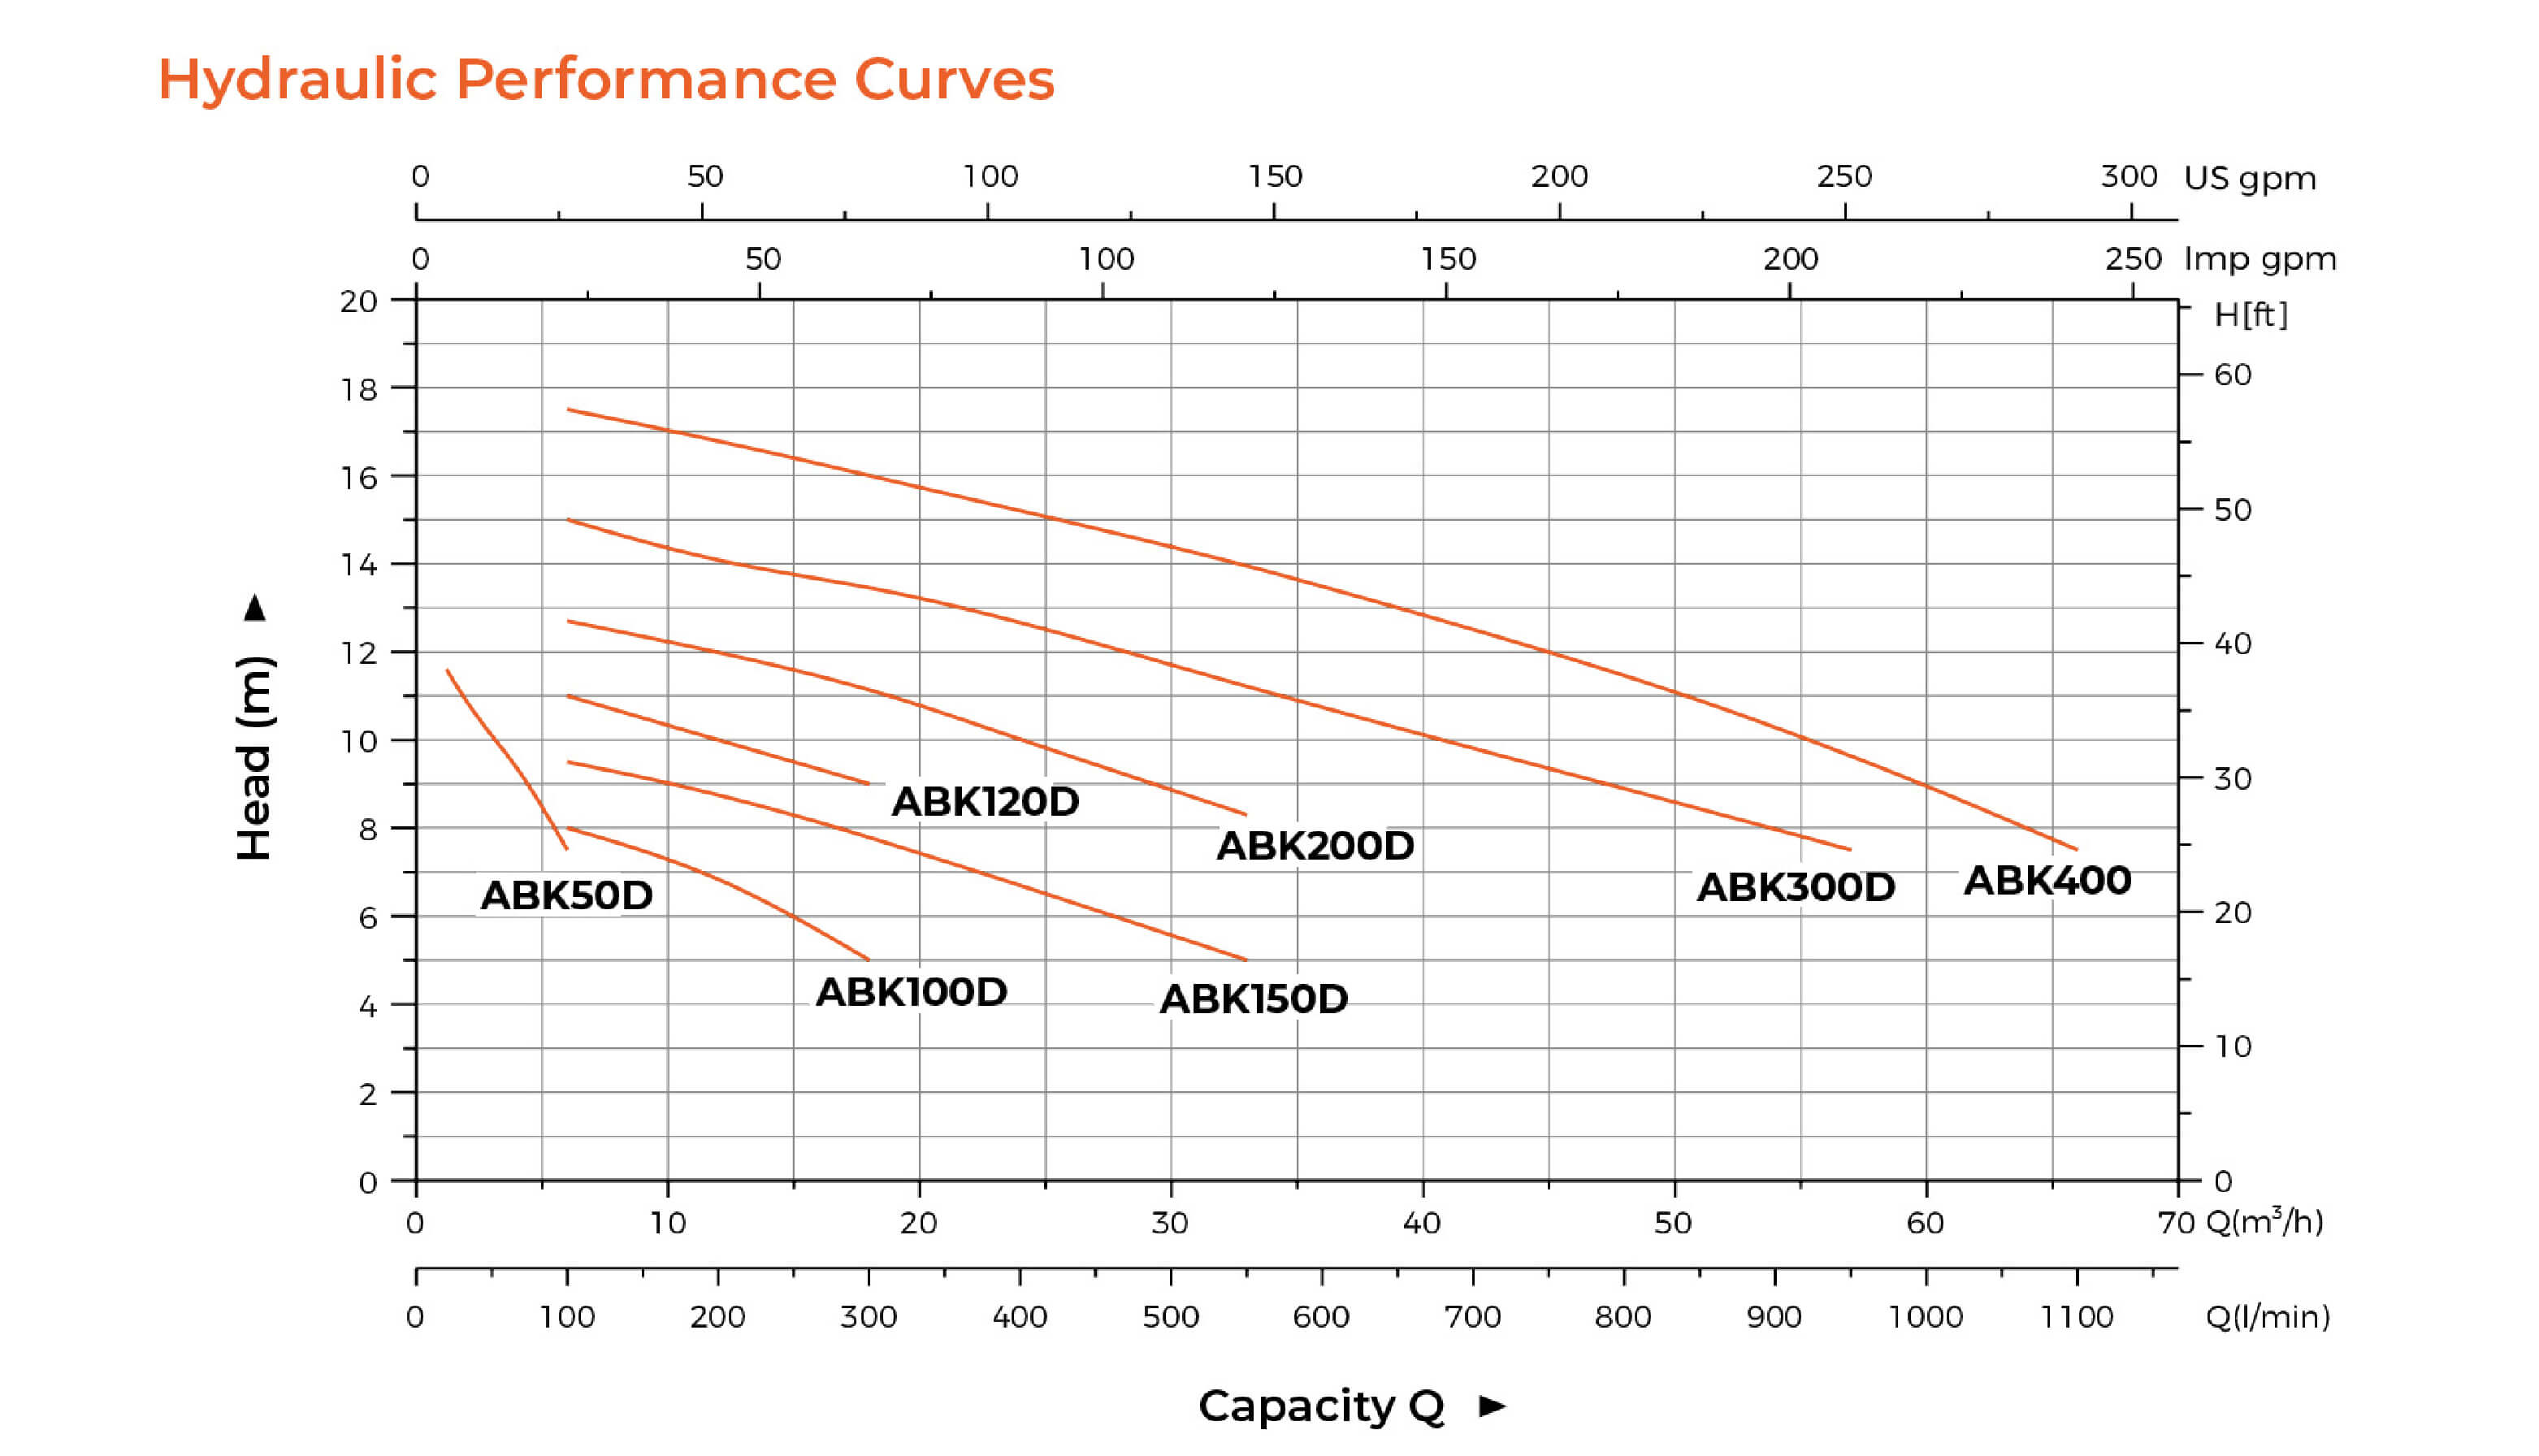 ABK Semi-open Impeller Stainless Steel Centrifugal Pump Hydraulic Performance Curves